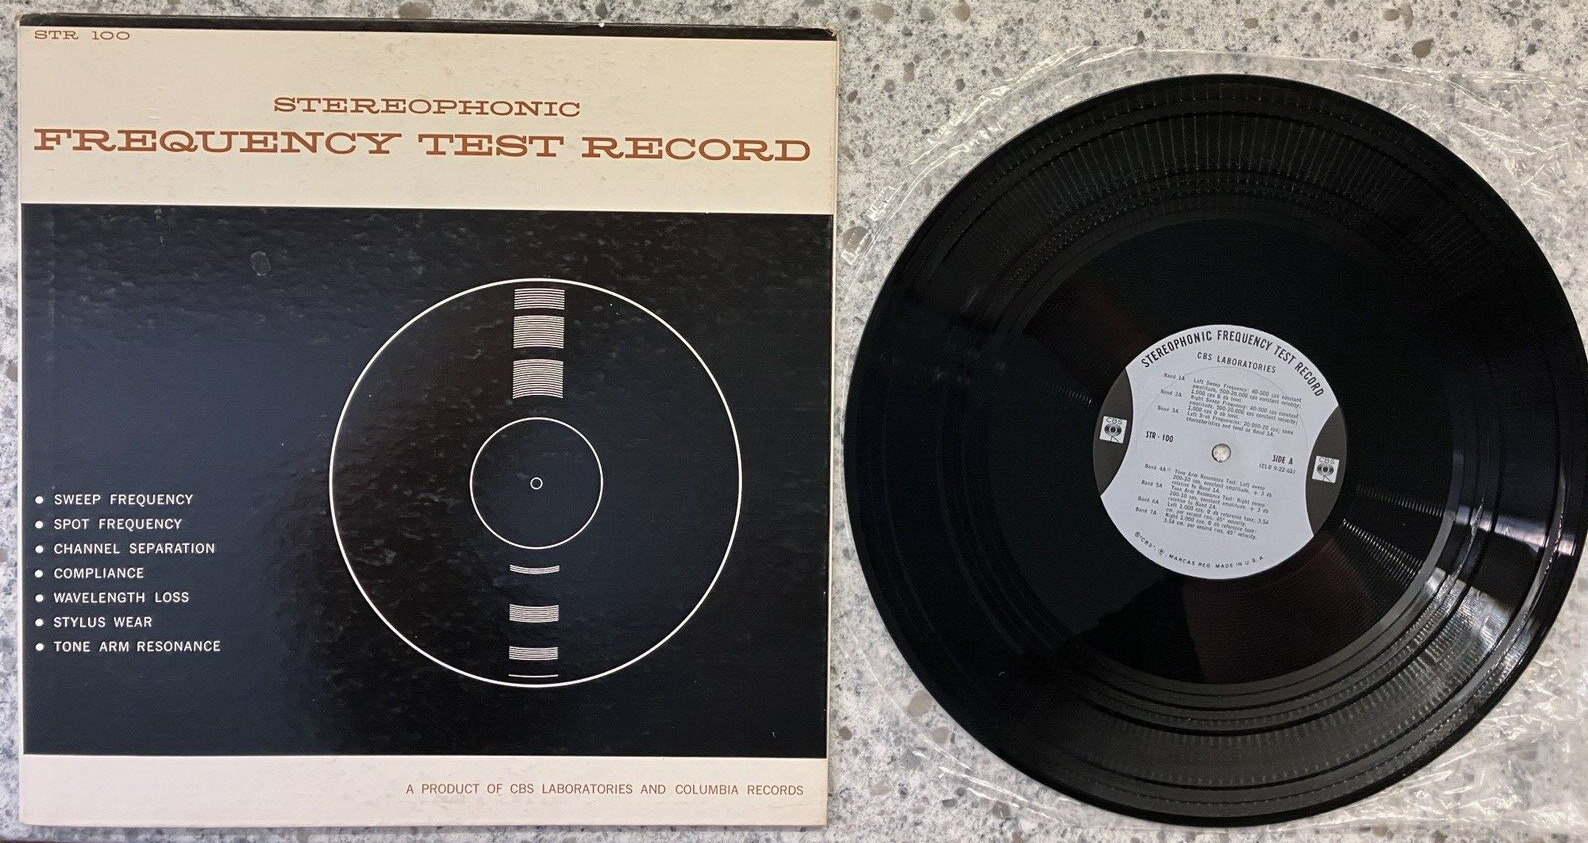 CBS Laboratories – Stereophonic Frequency Test Record ; 1962 LP - LOOKS UNPLAYED